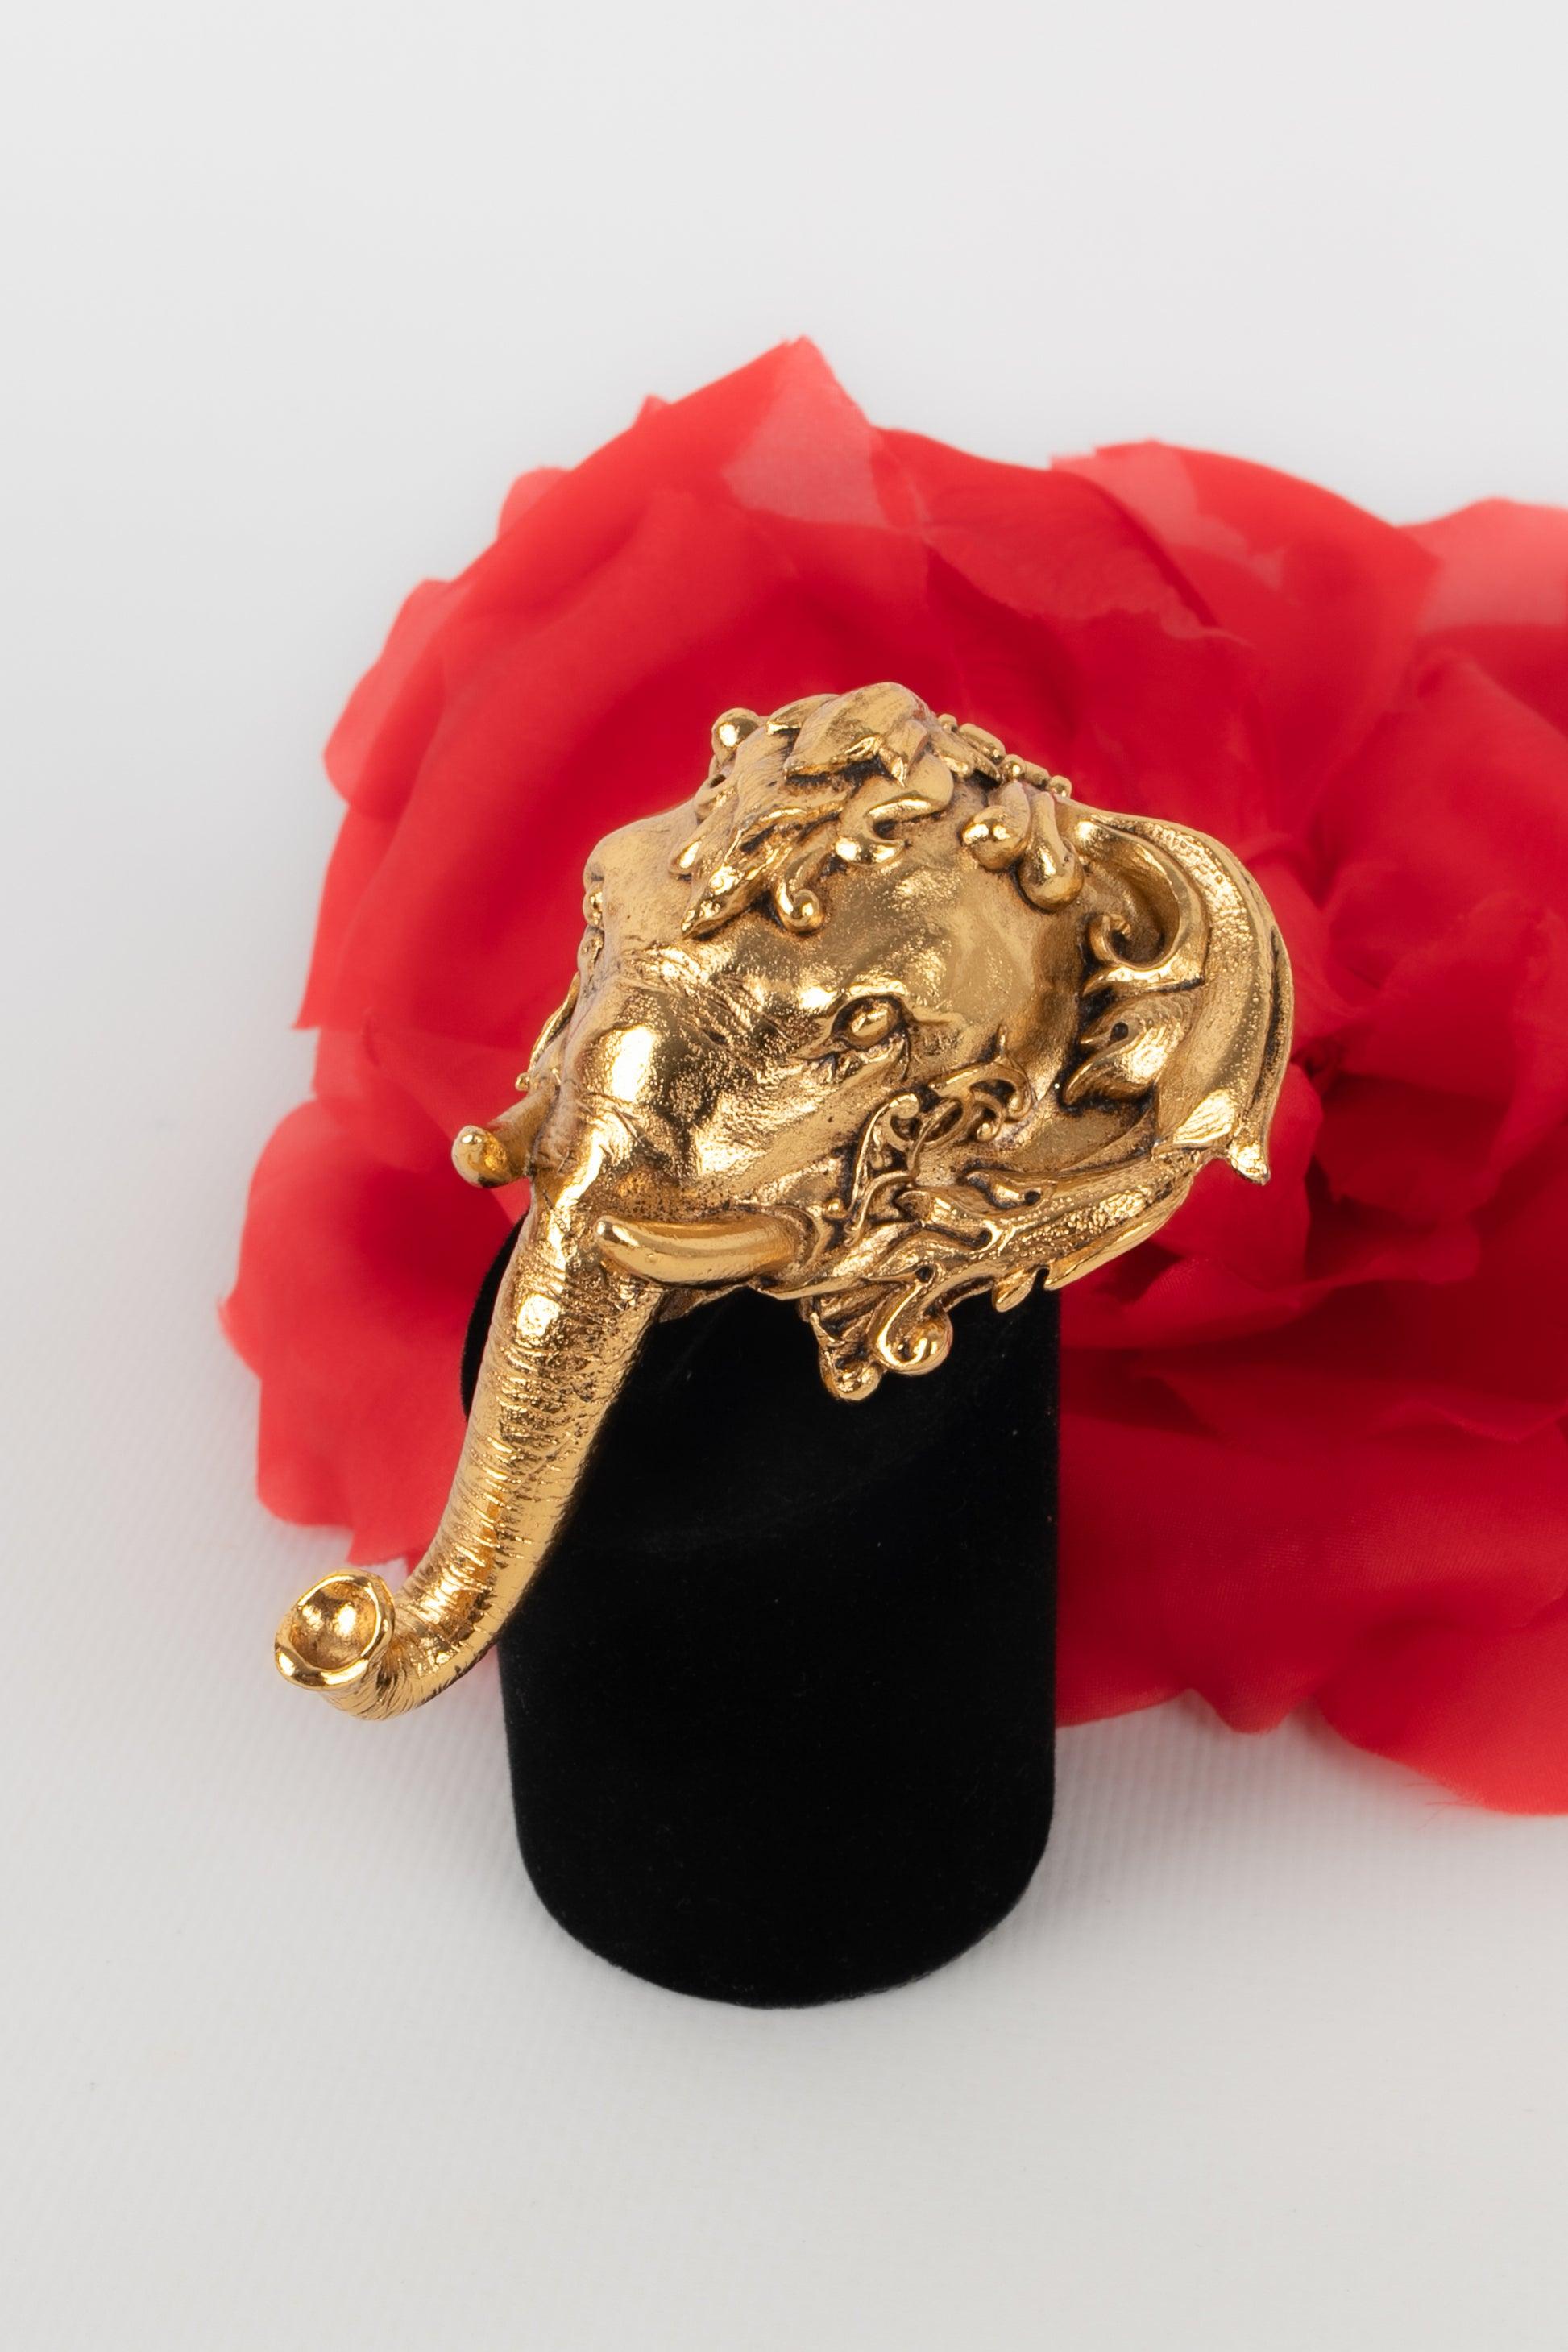 Christian Dior Gold-Plated Metal Pendant Brooch Depicting an Elephant Head For Sale 5